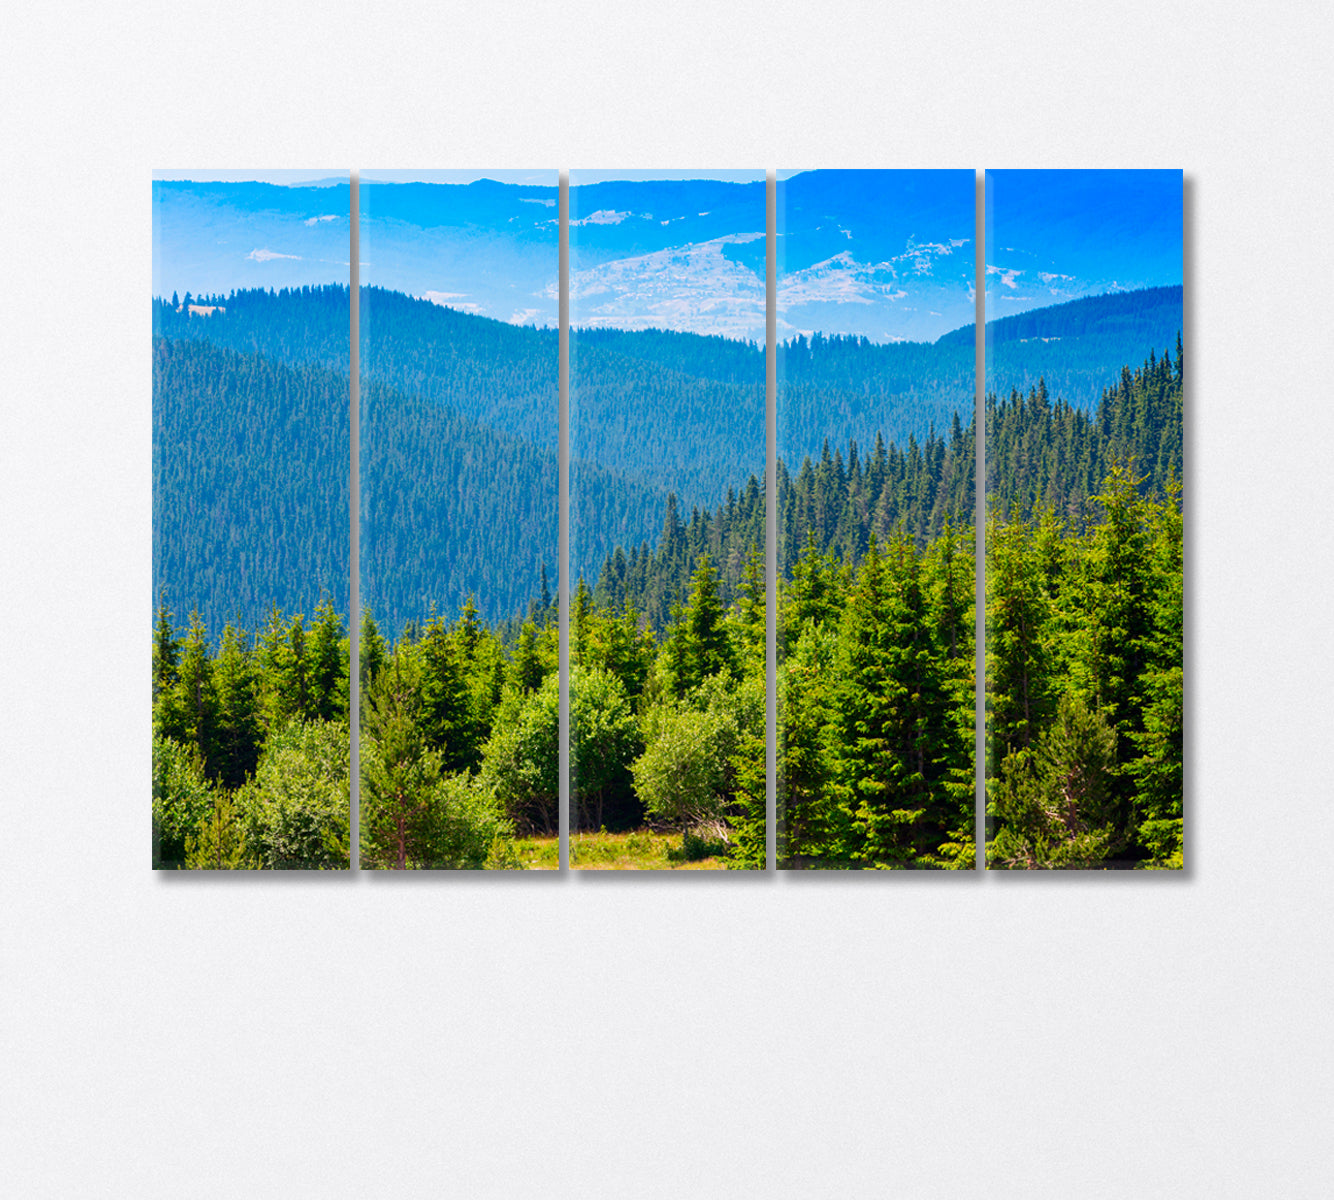 Aerial View of the Pine Forest Canvas Print-Canvas Print-CetArt-5 Panels-36x24 inches-CetArt